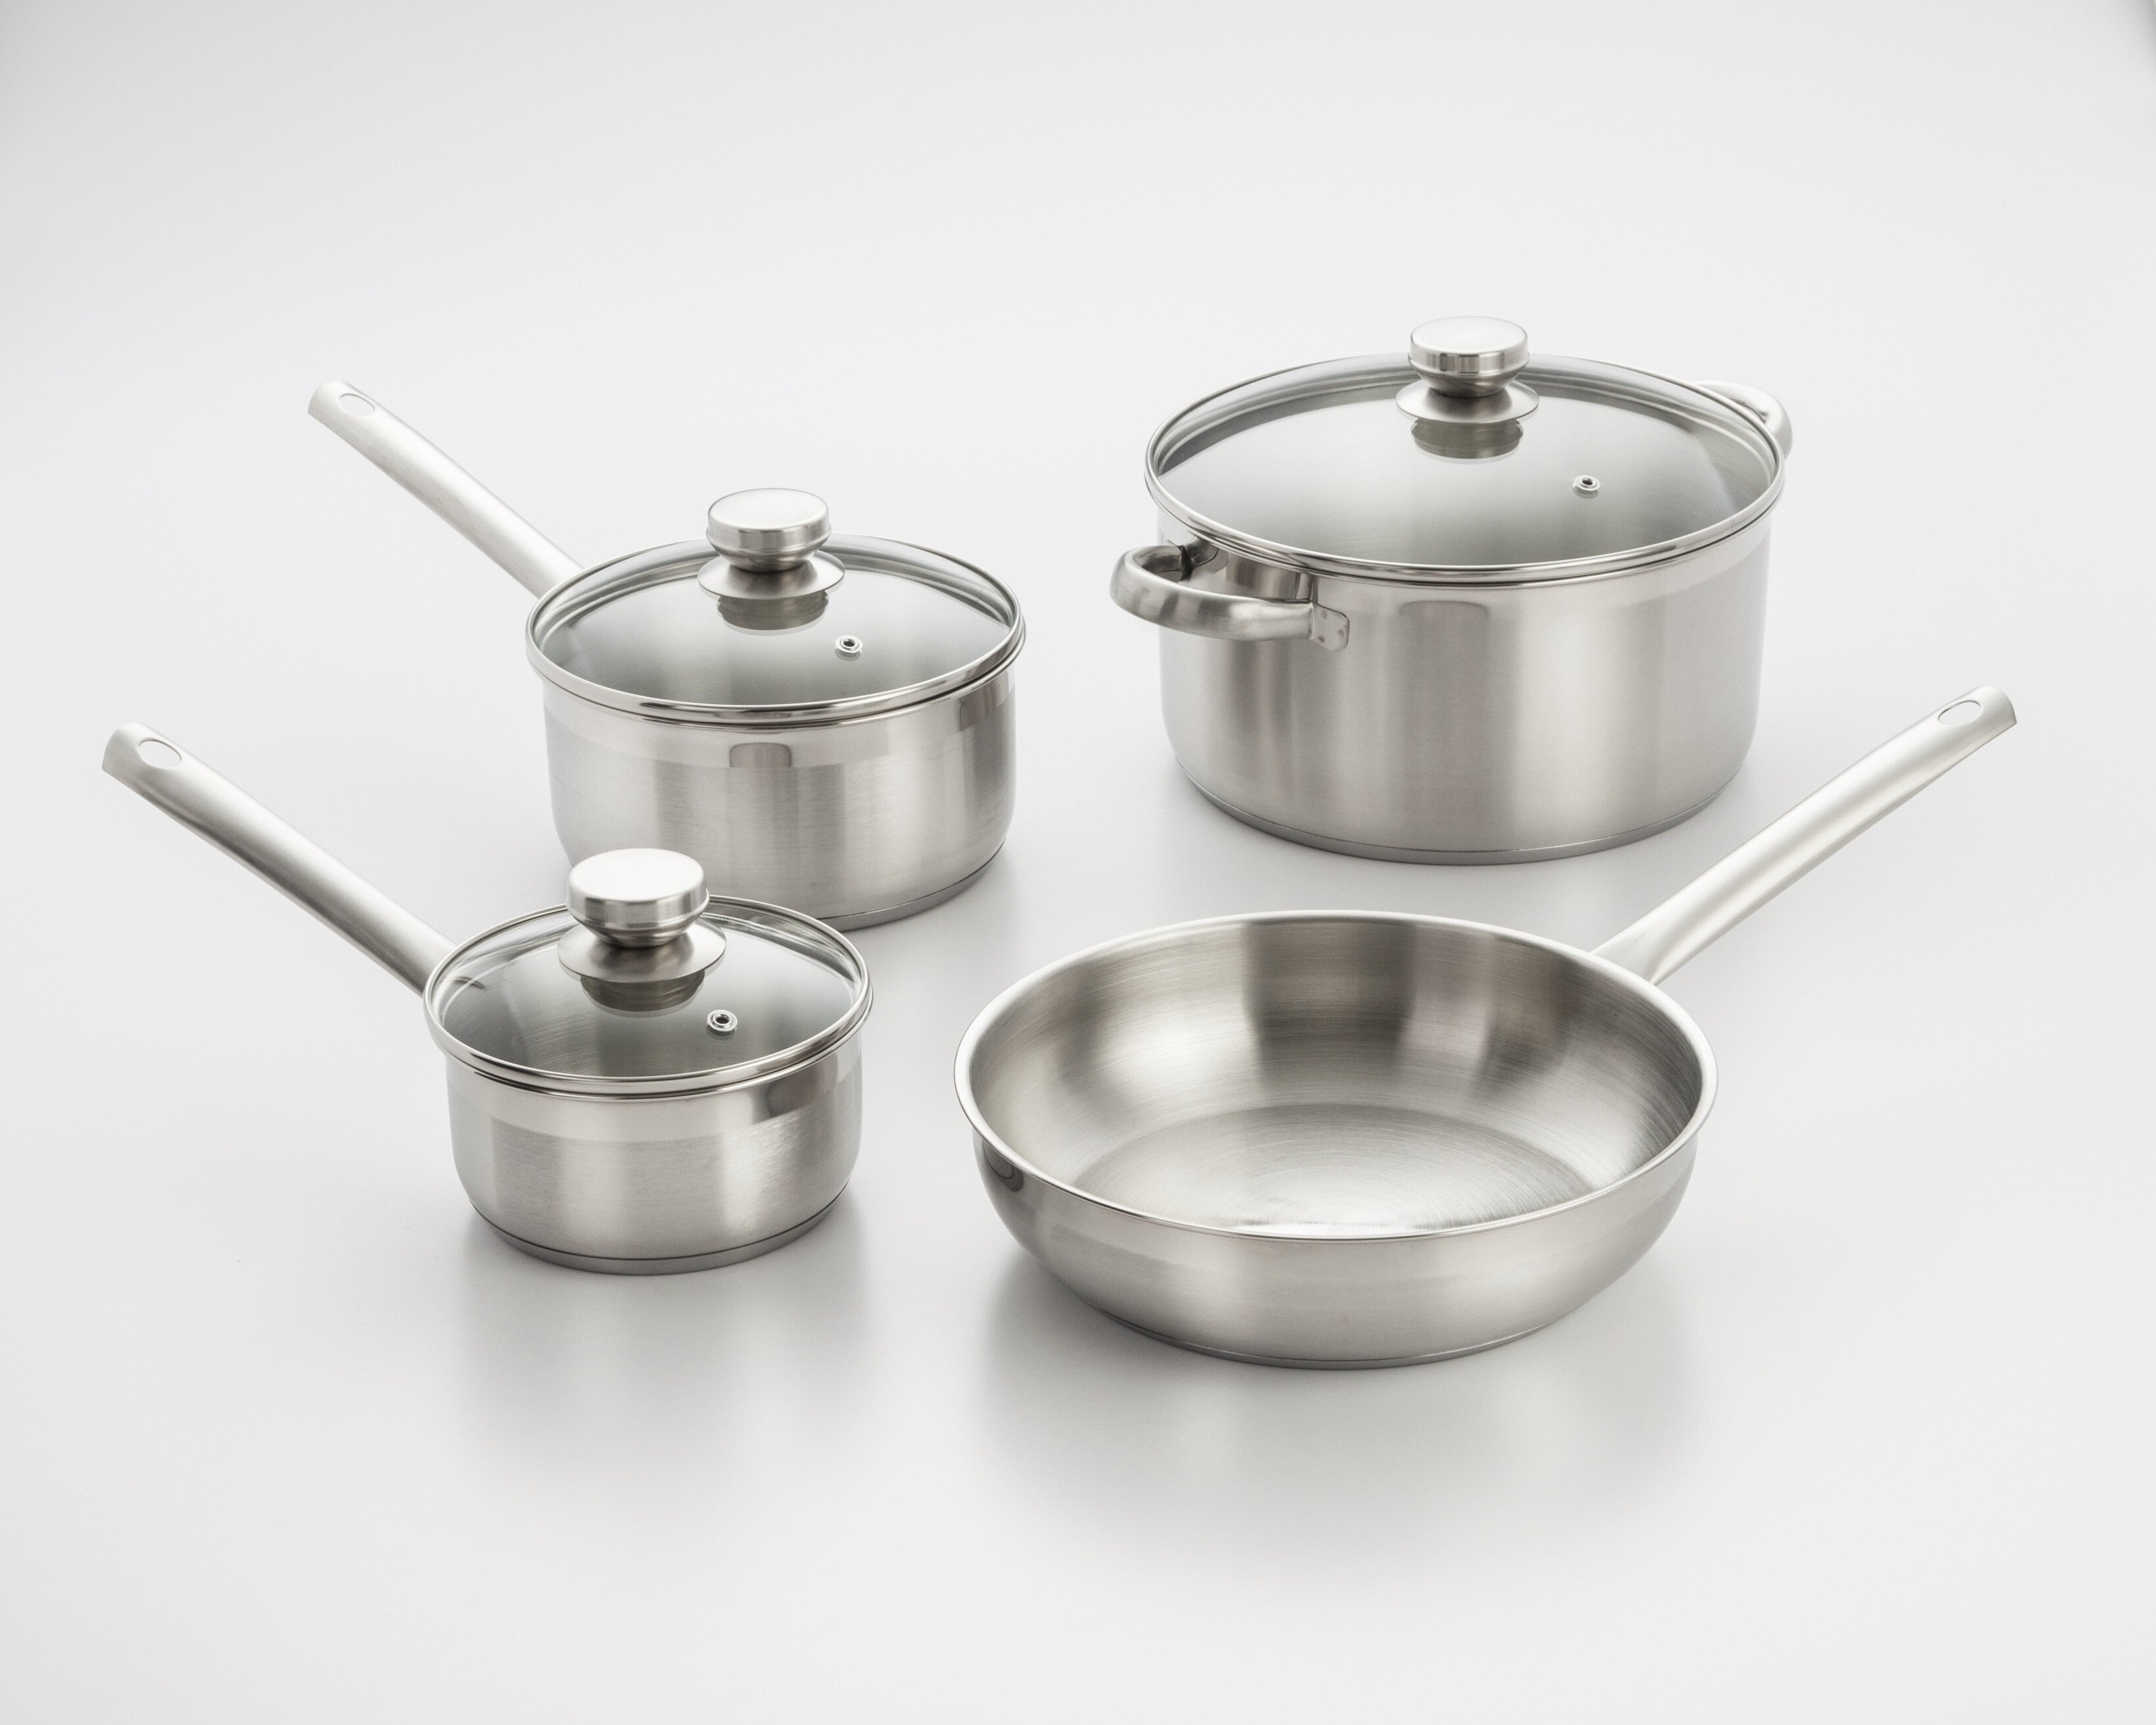  Revere 7-Piece 18/10 Stainless Steel Tri-Ply Bottom Cookware Set  : Home & Kitchen